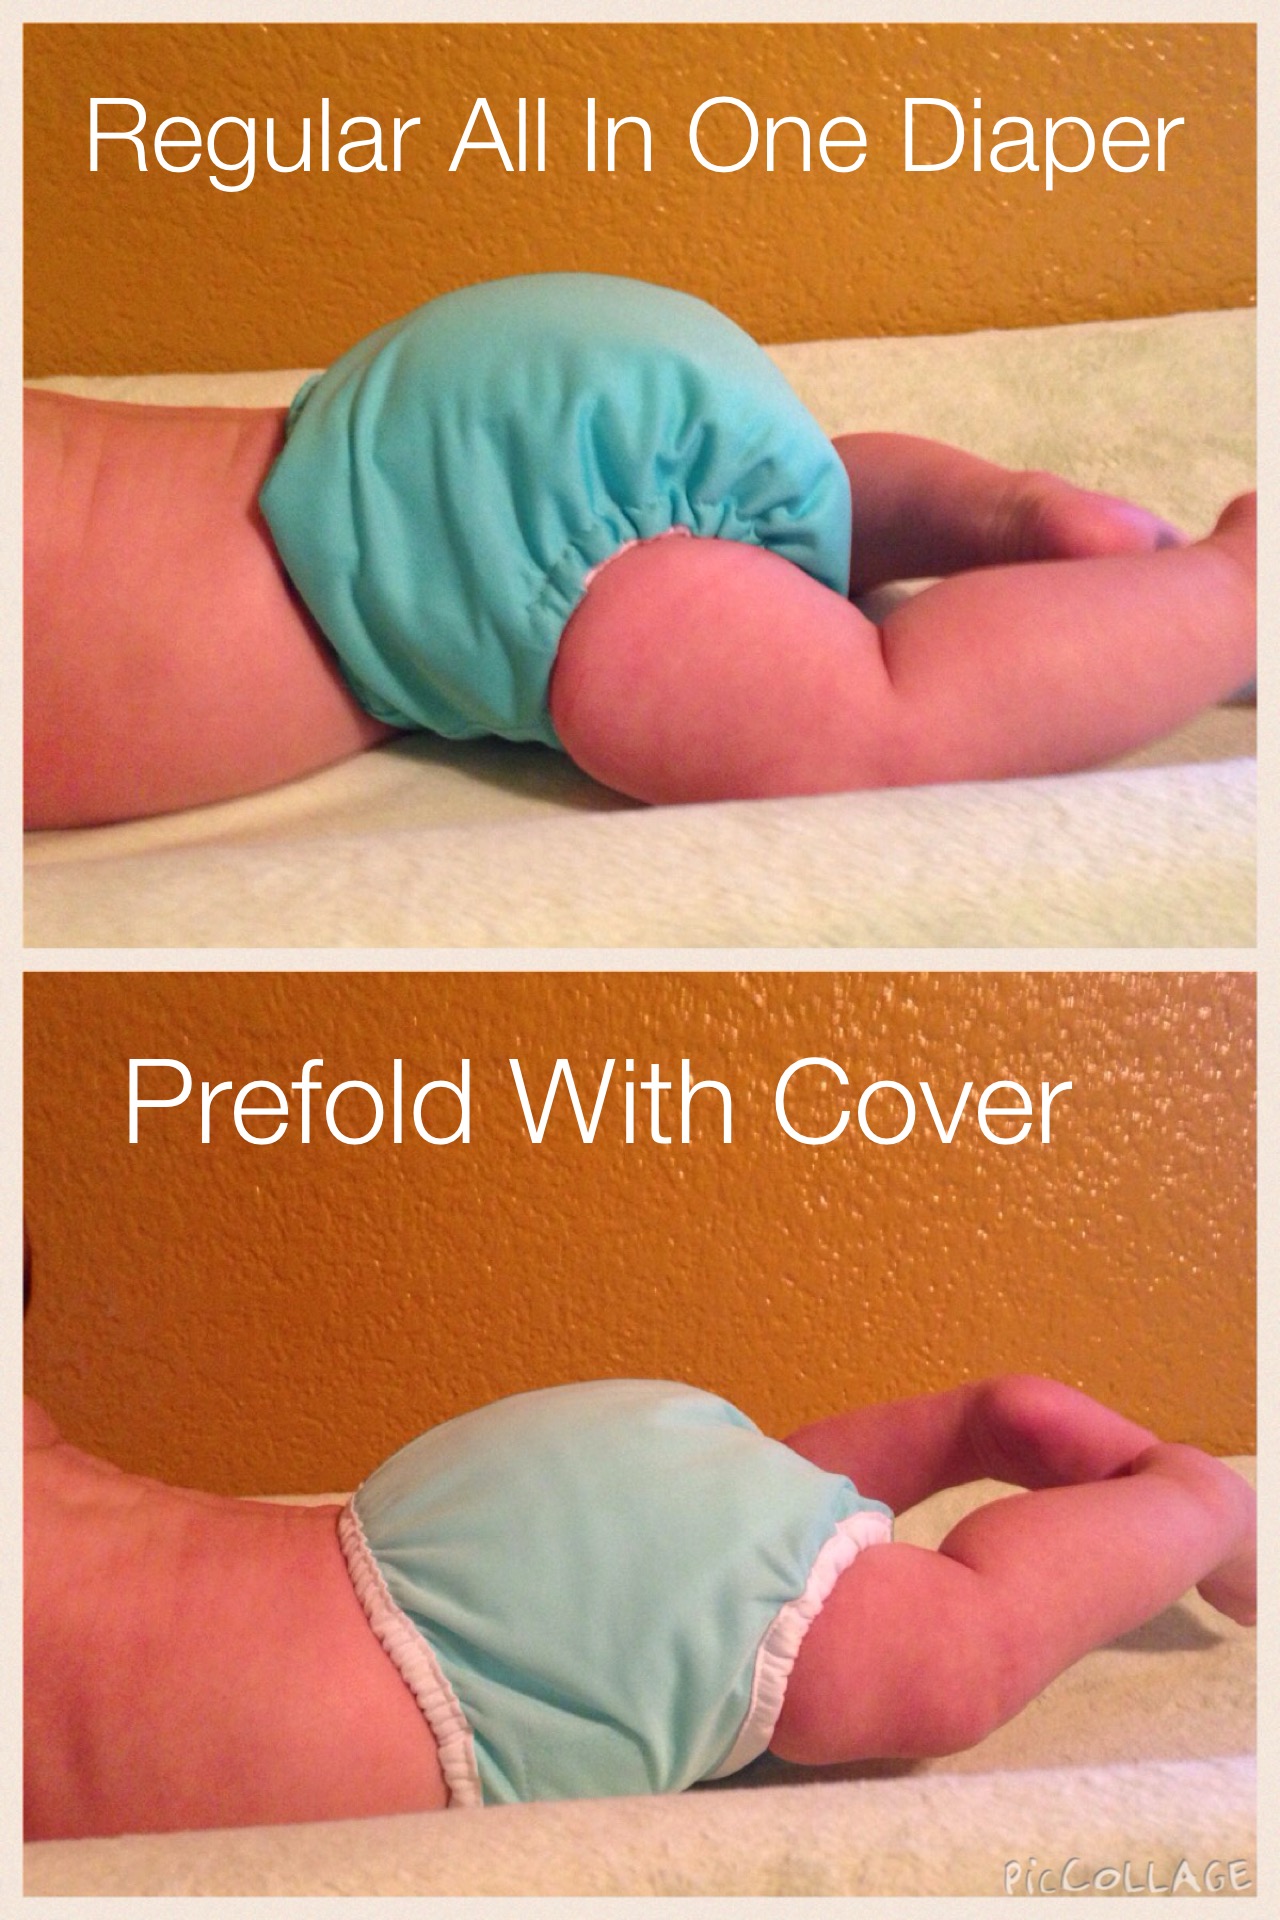 5-advantages-of-prefold-cloth-diapers-mygreennest